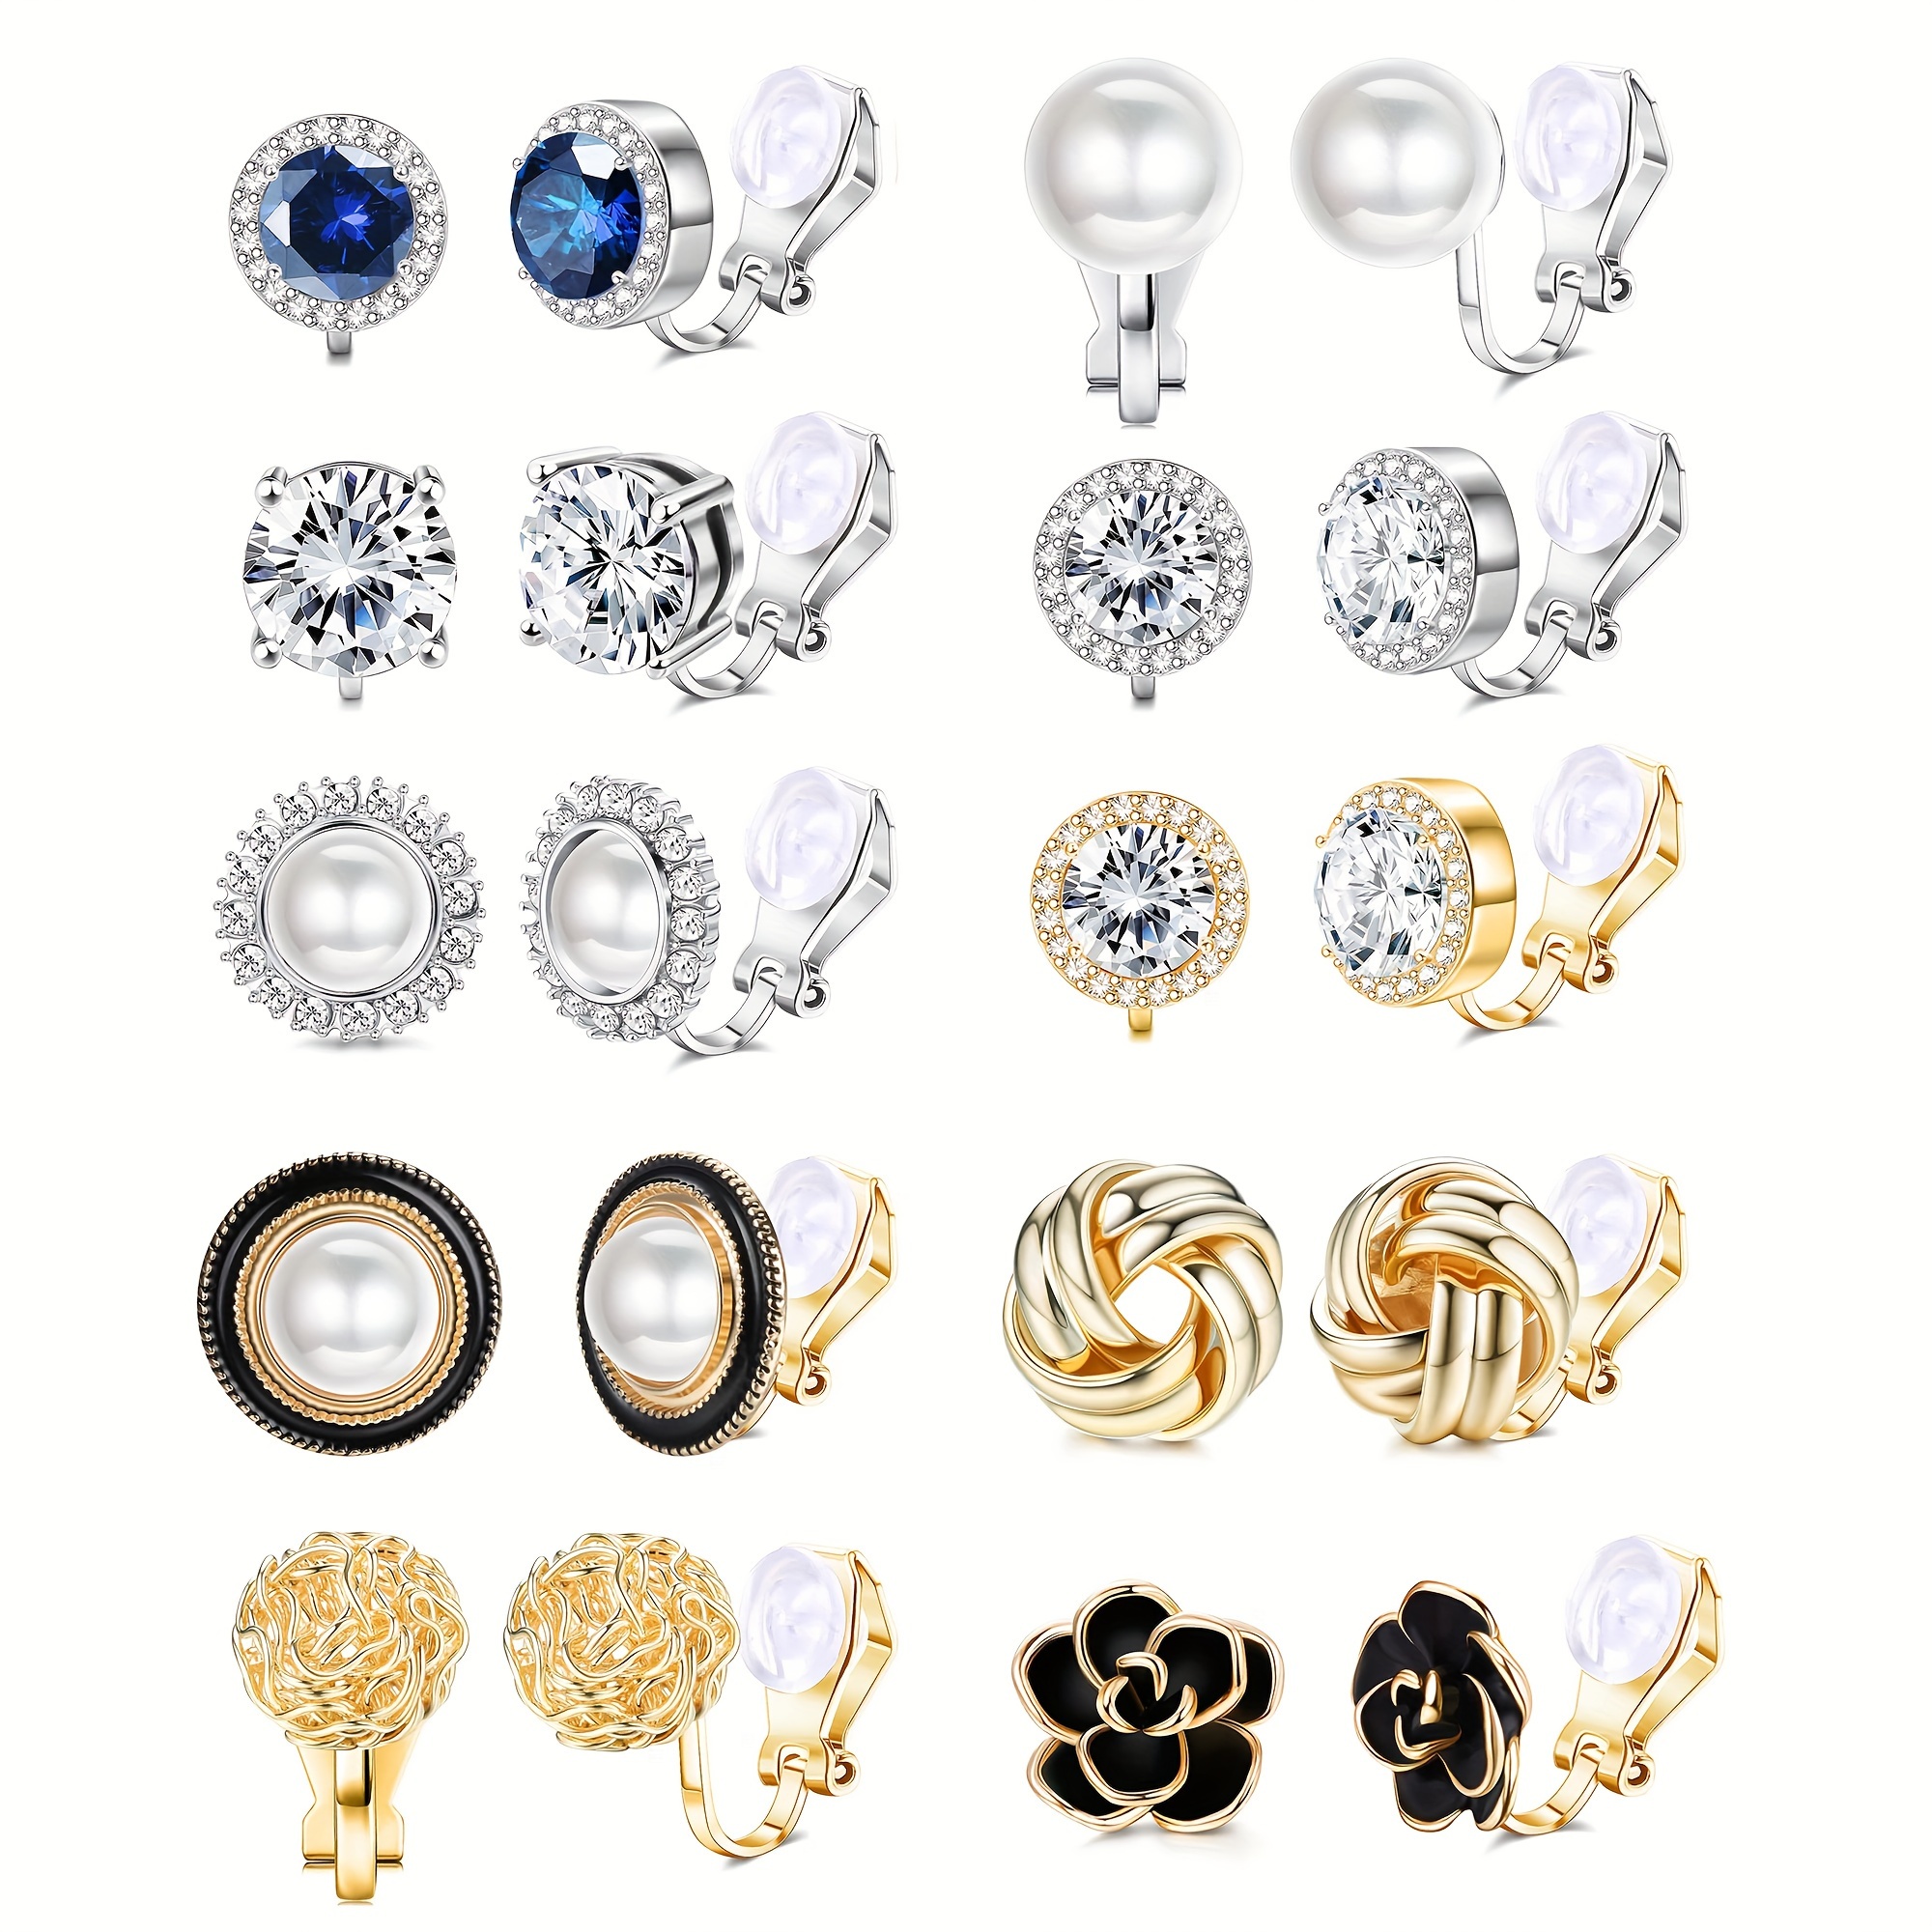 

10 Pair Set Of Delicate Clip On Earrings Round Shaped Embellished With Zircon Zinc Alloy Jewelry Elegant Style For Women